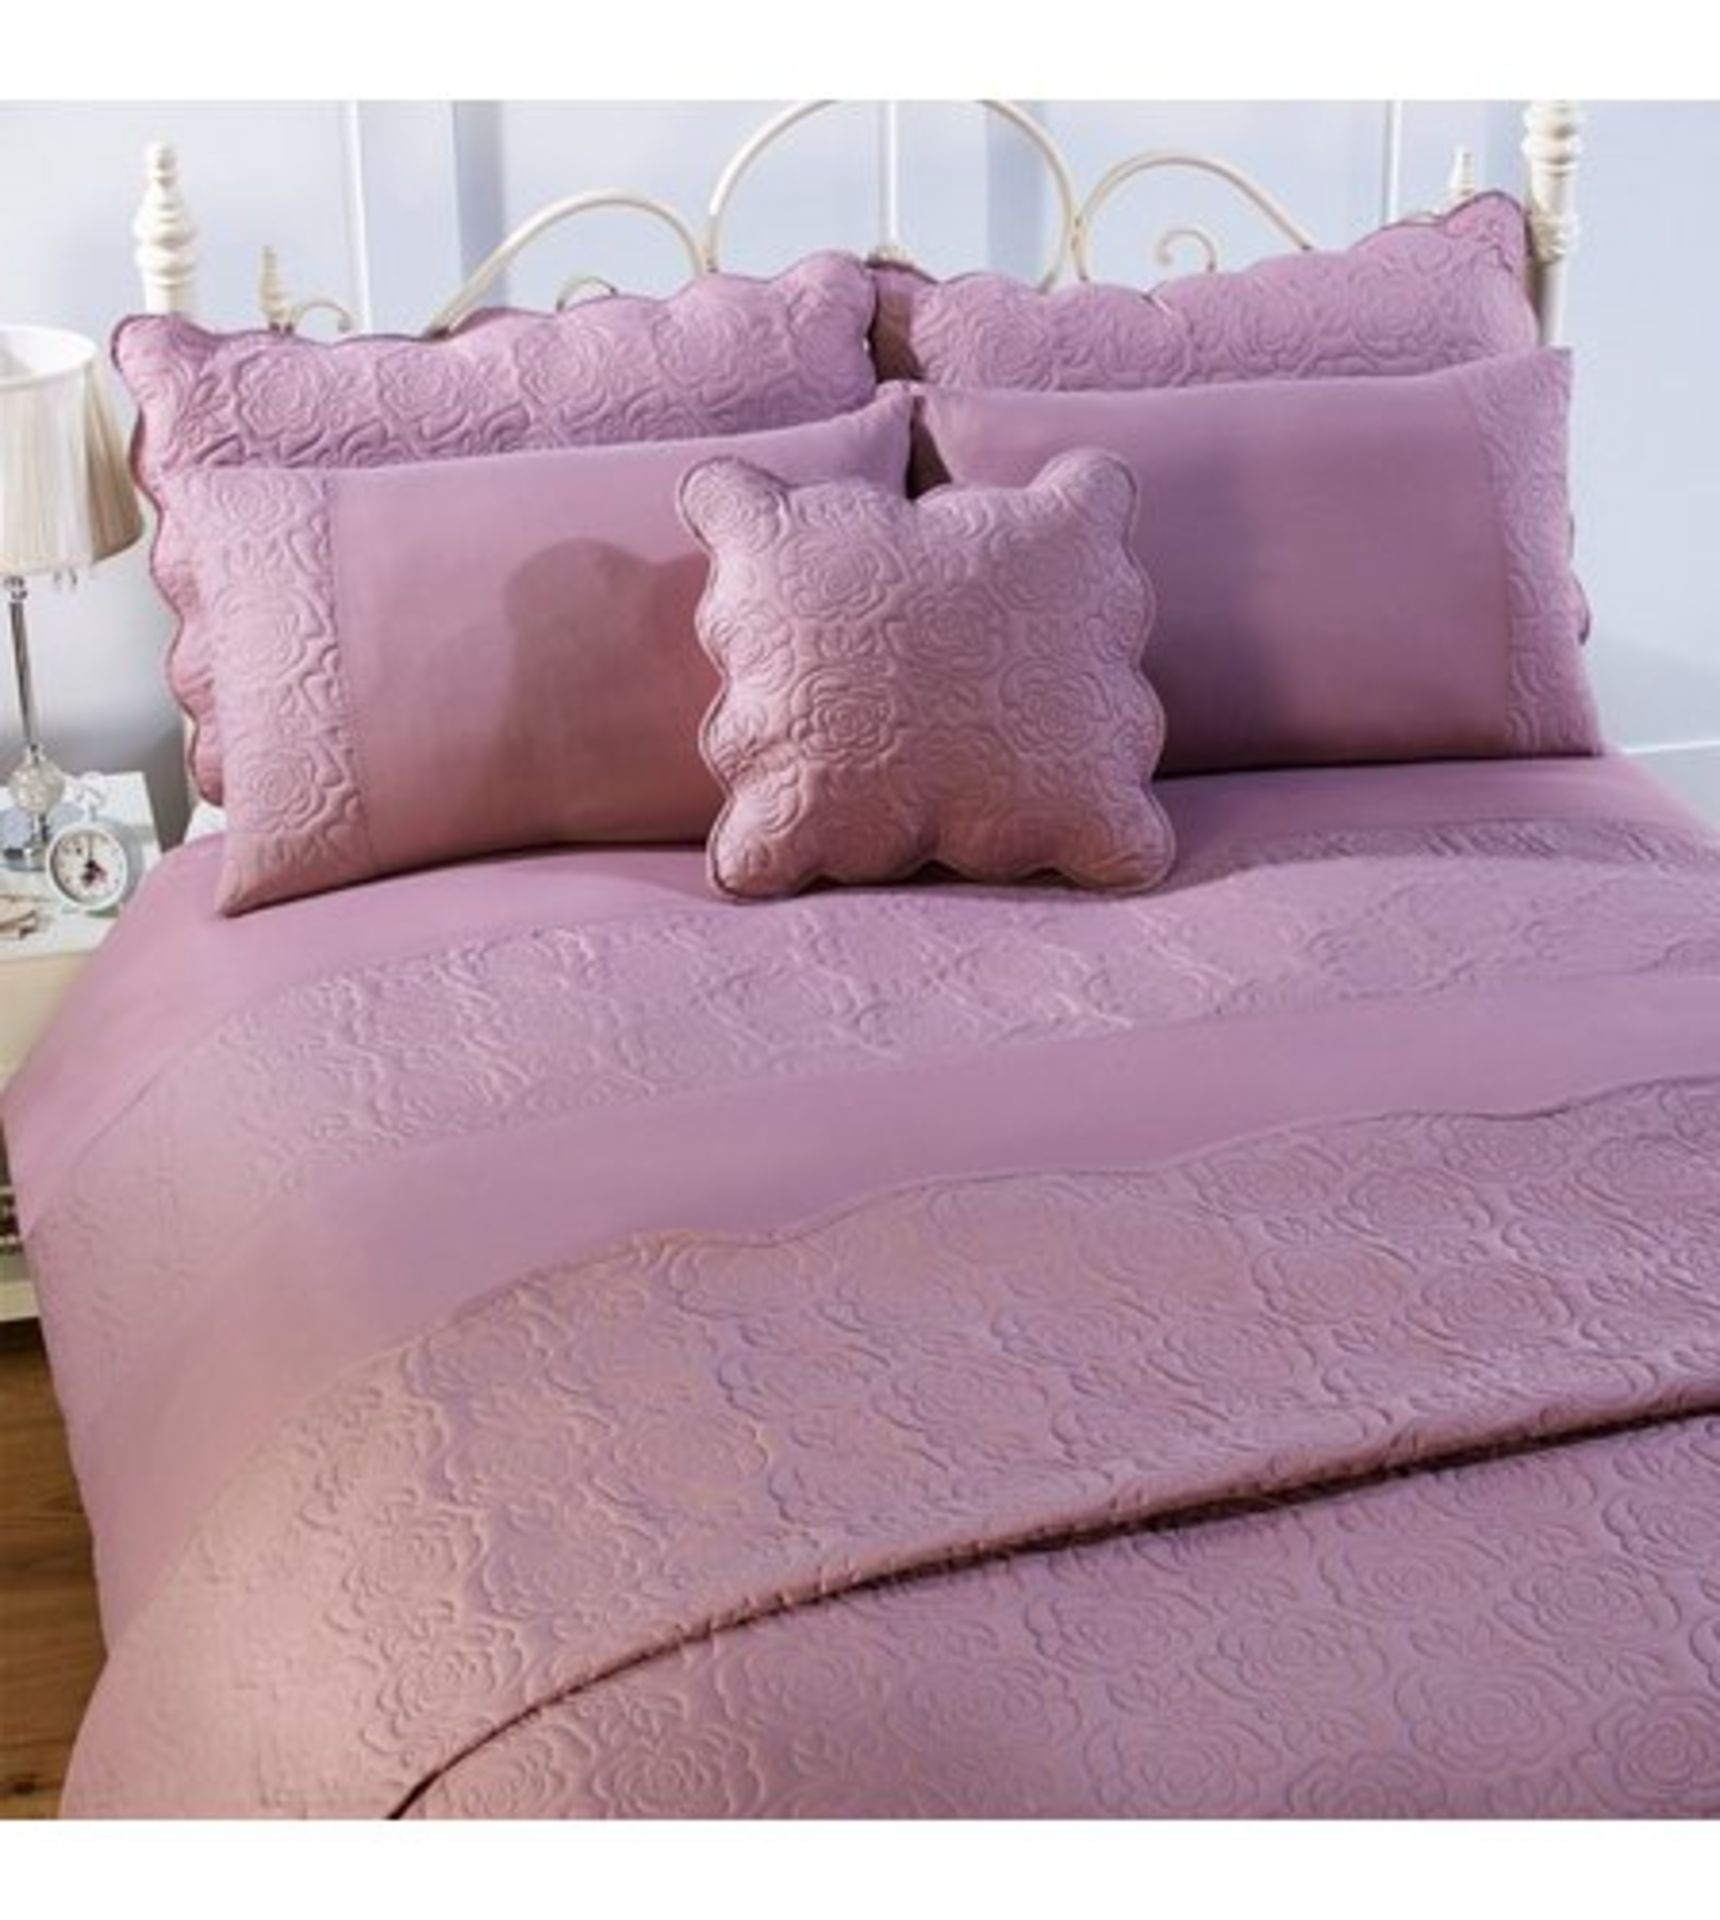 1 PACKAGED COUTURE ROSE PAIR OF PILLOWSHAMS IN ROSE PINK